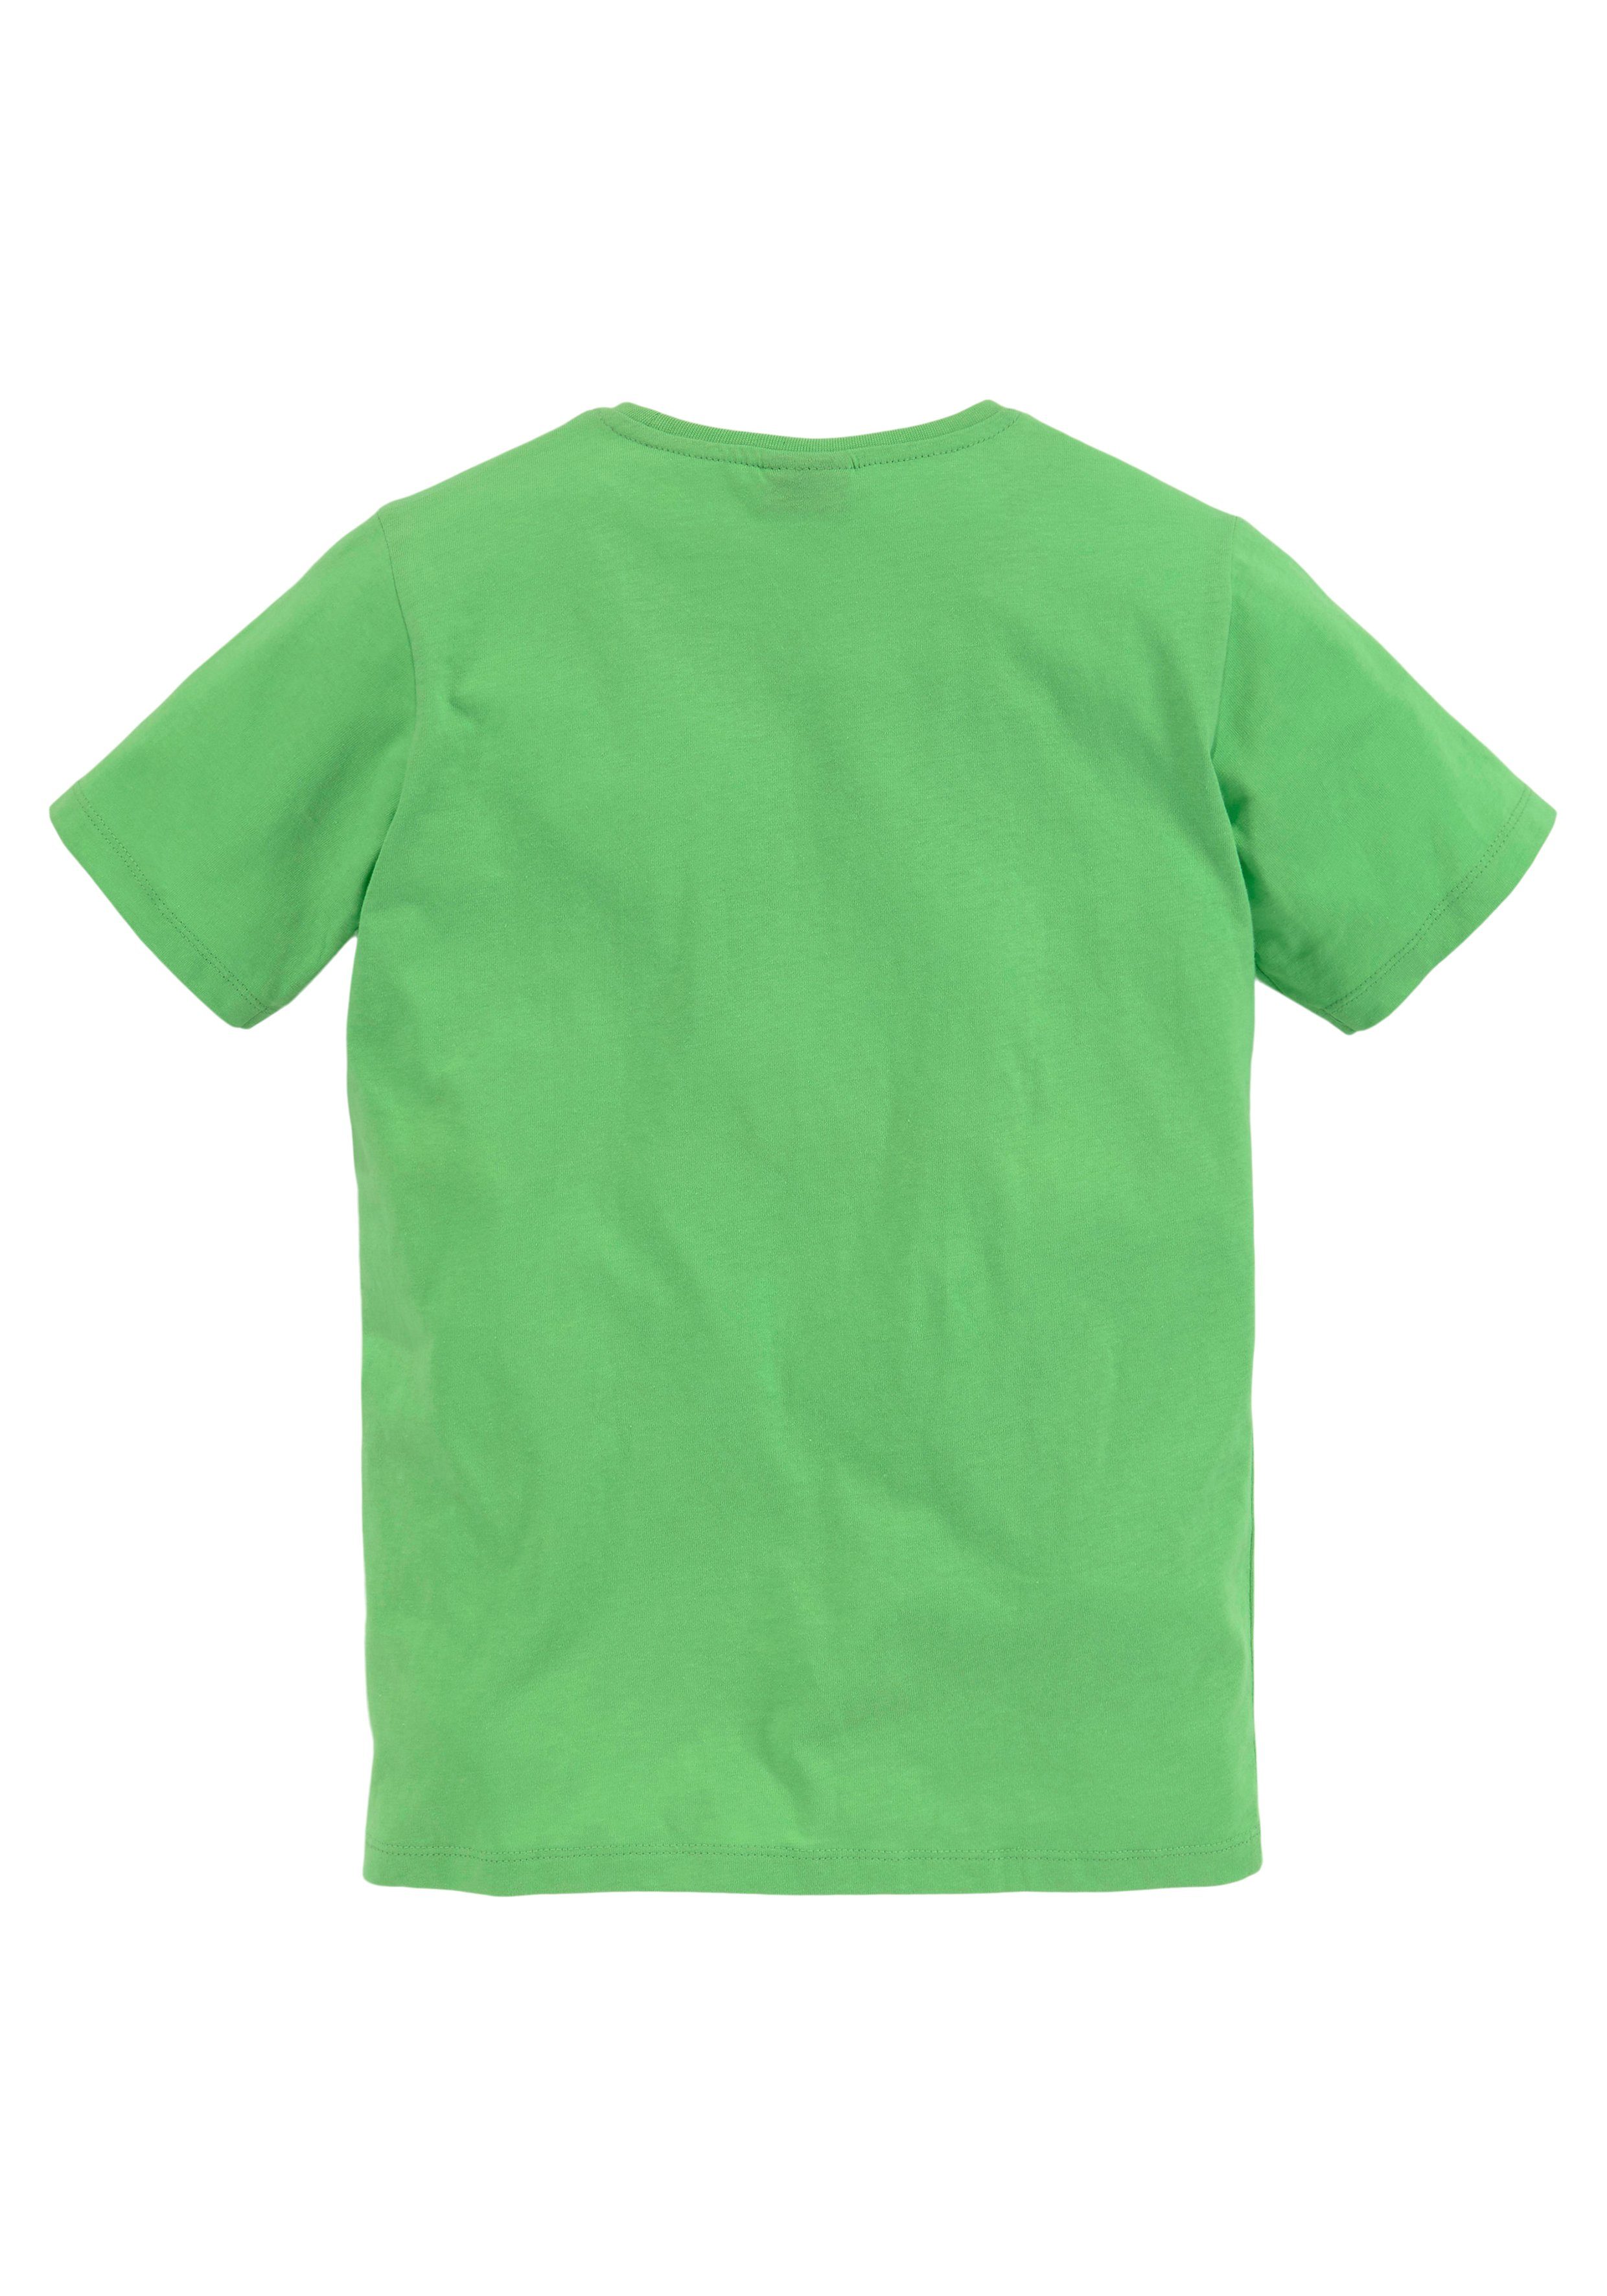 T-Shirt GAMES KIDSWORLD RULES YOUR YOUR